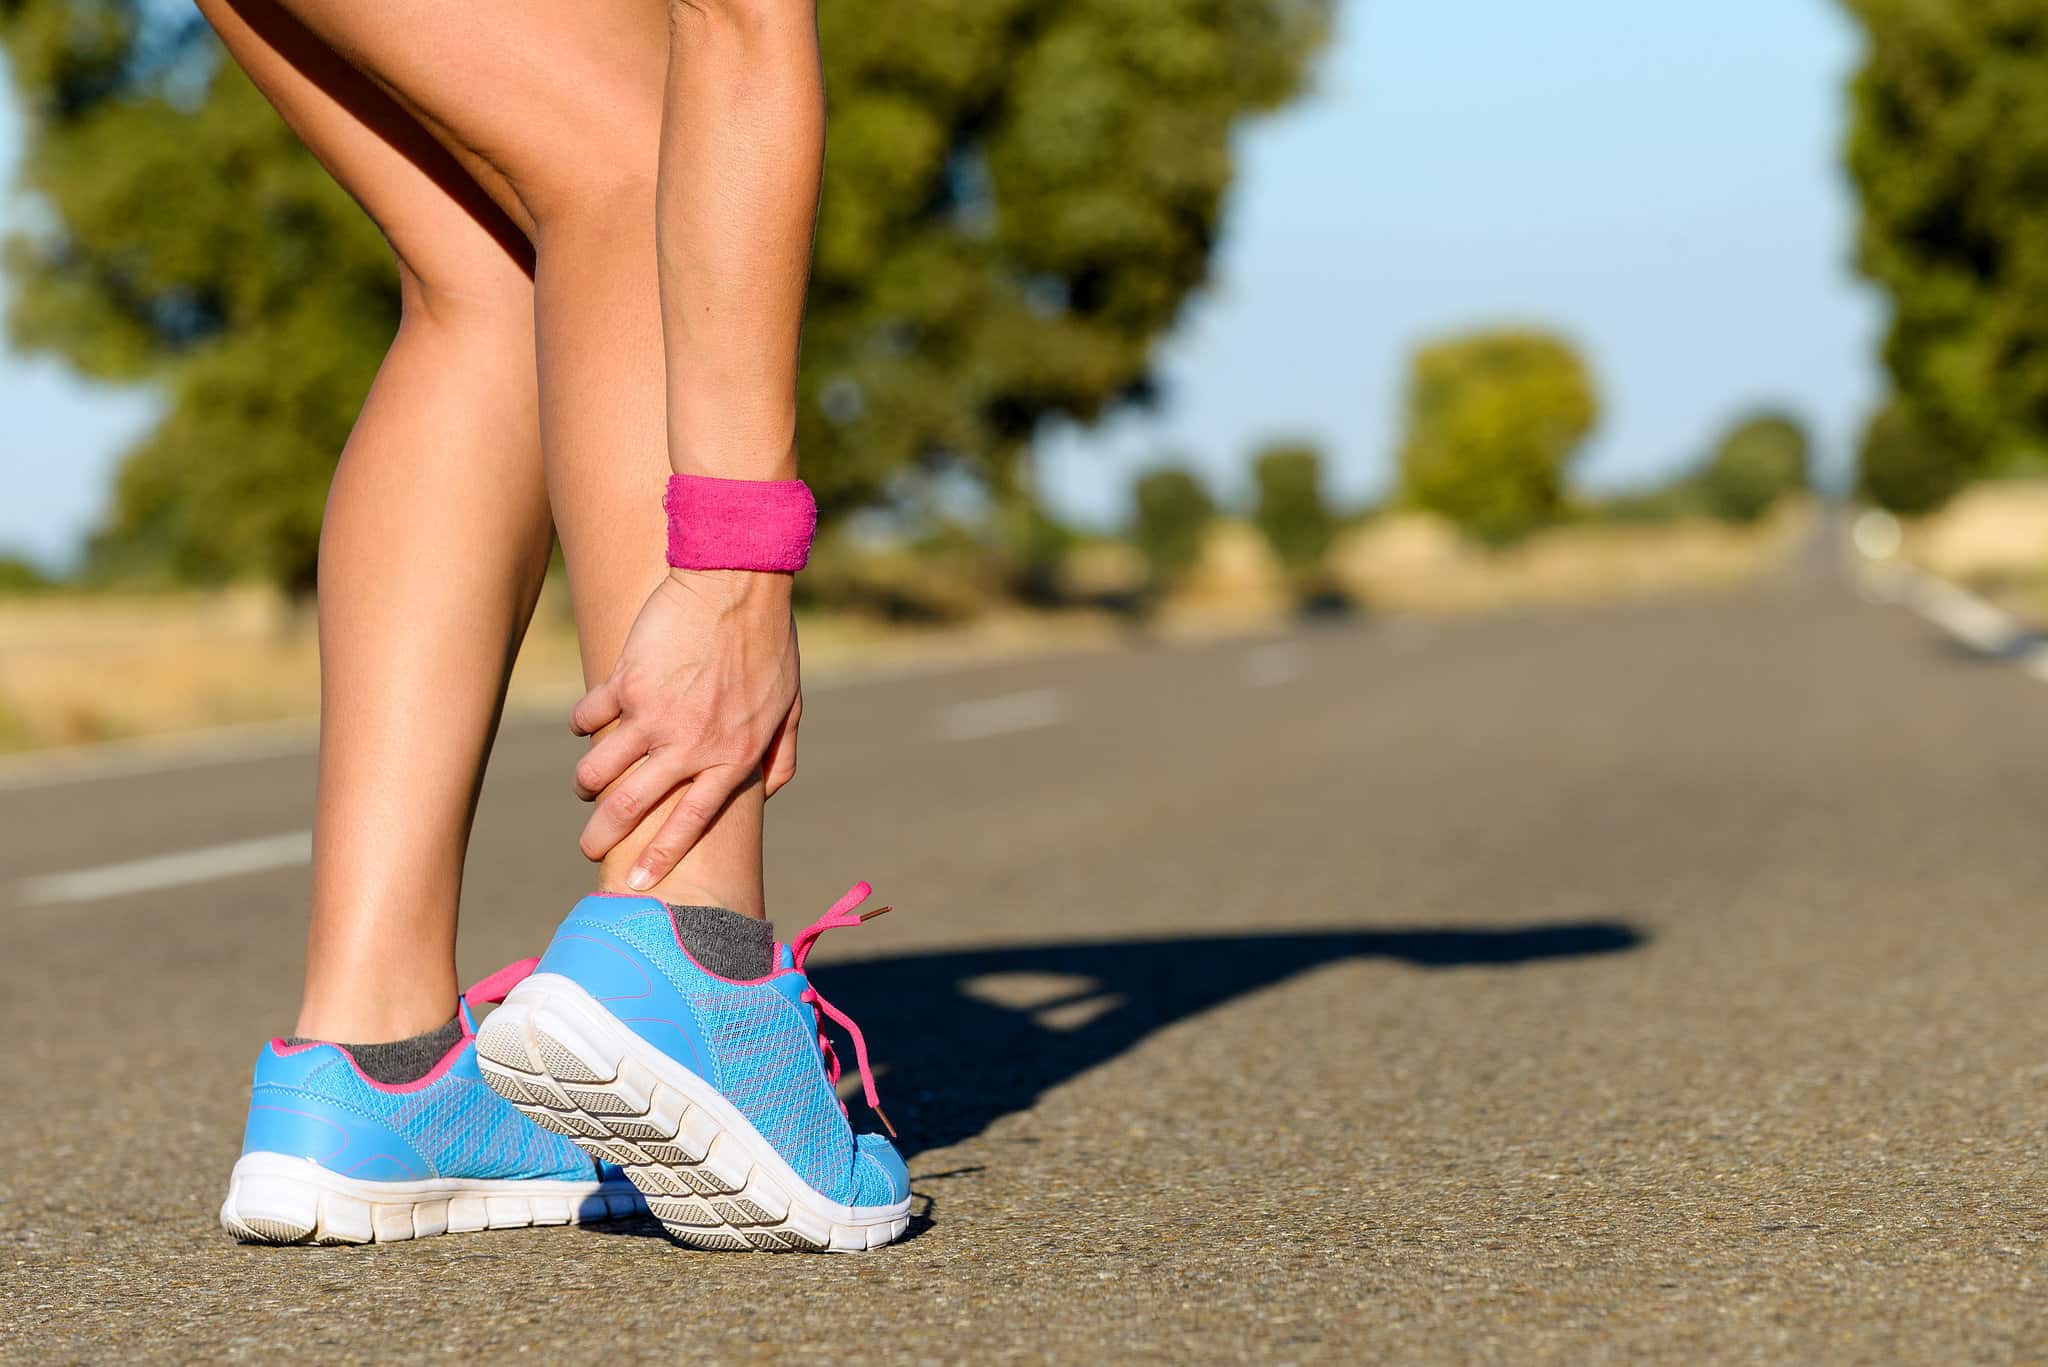 best running ankle support